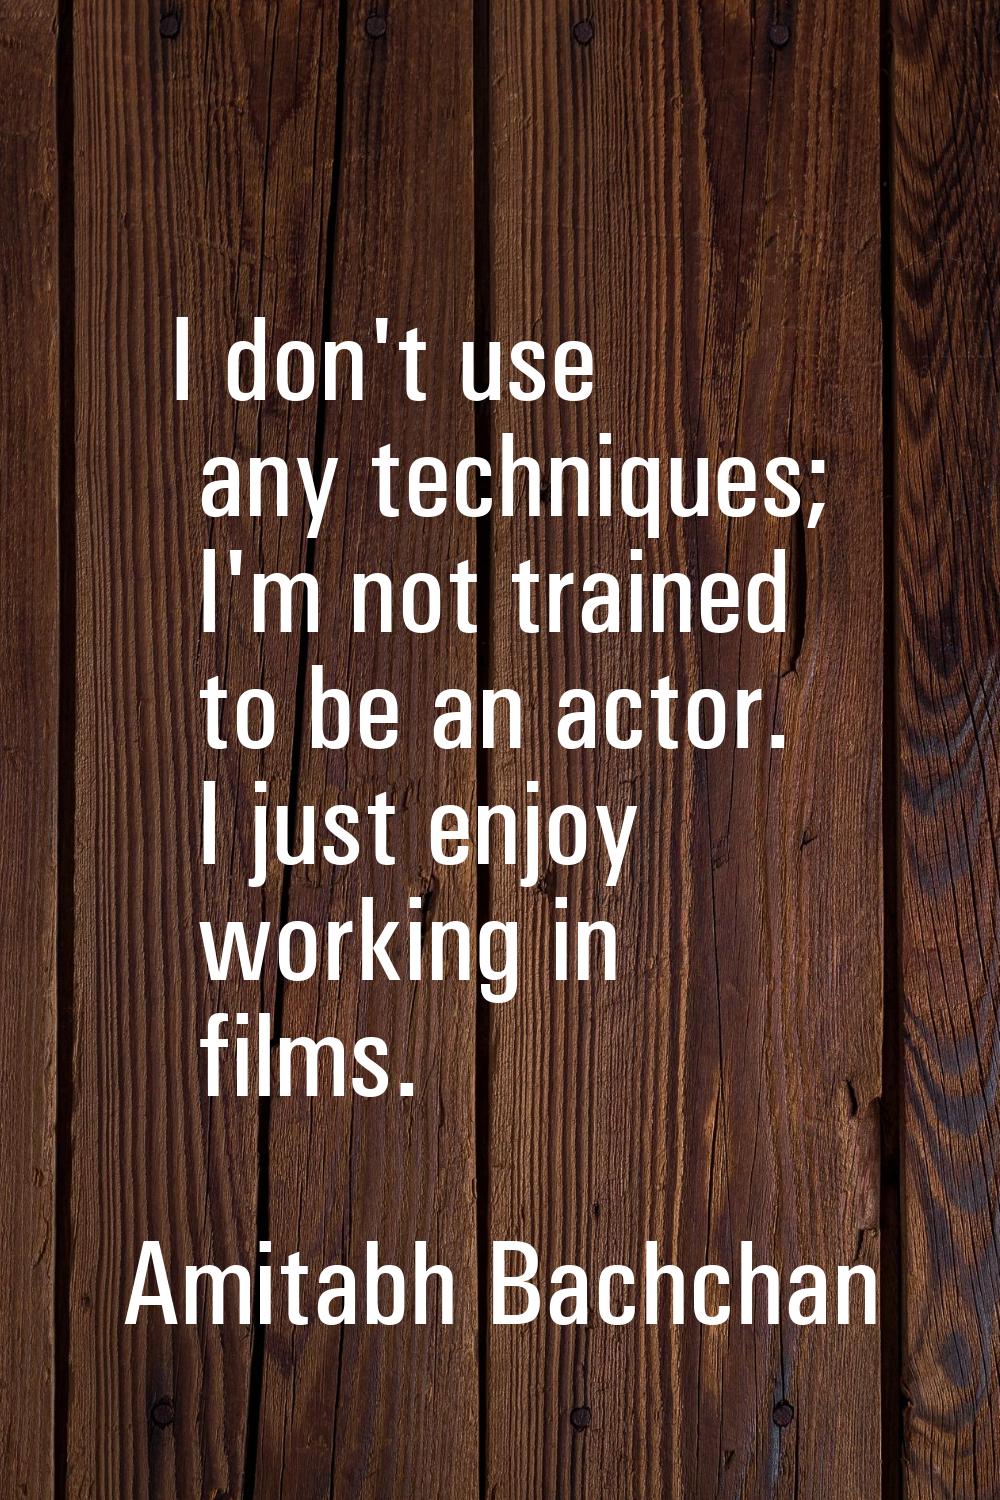 I don't use any techniques; I'm not trained to be an actor. I just enjoy working in films.